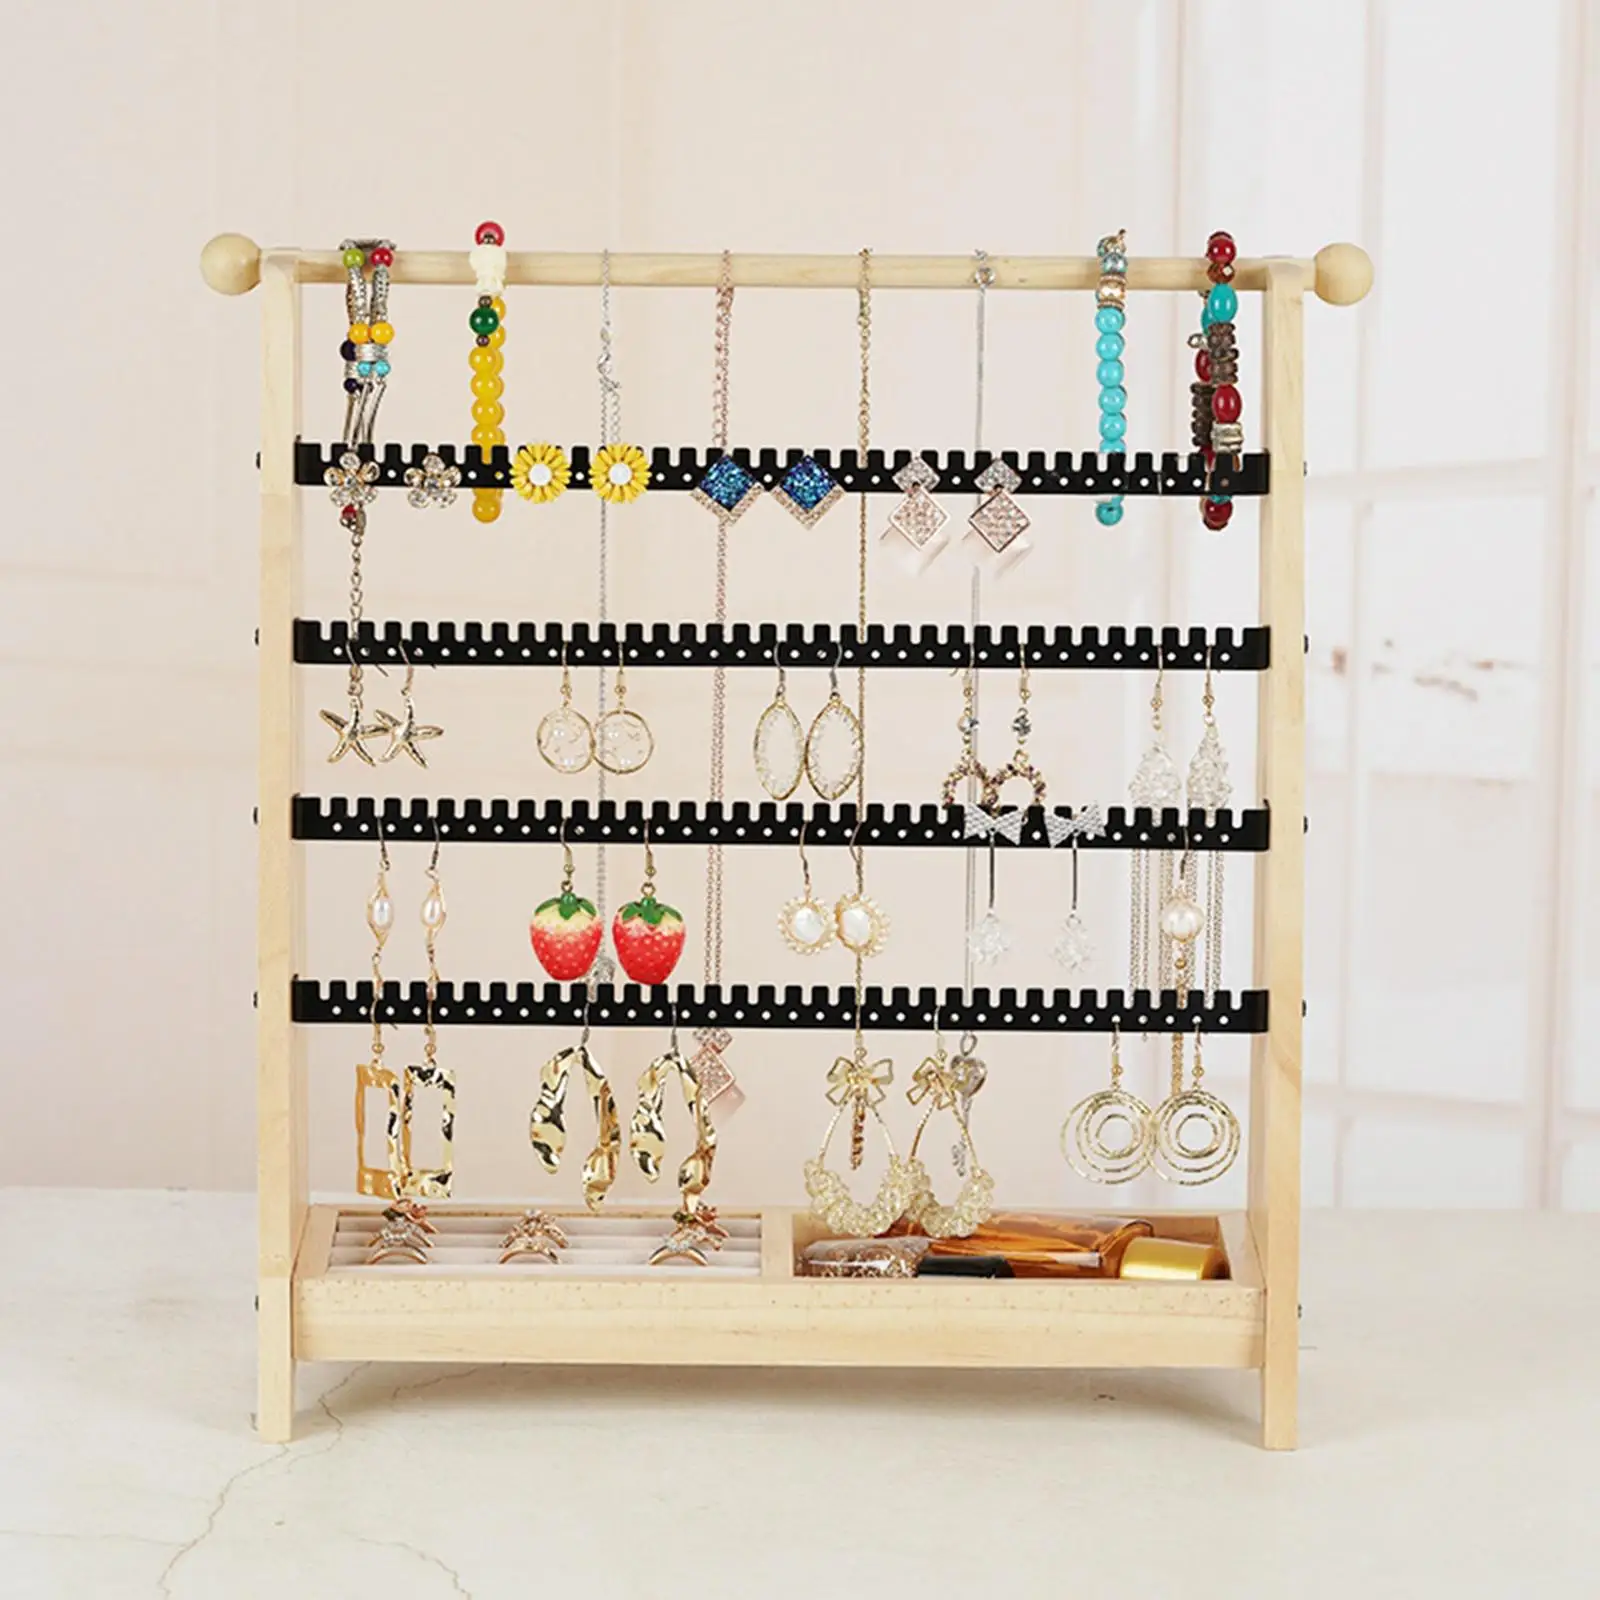 5 Tiers Jewelry Display Stand Display Counter Multifunctional Dresser Earrings Organizer for Rings Necklace Holder Hanging Rack